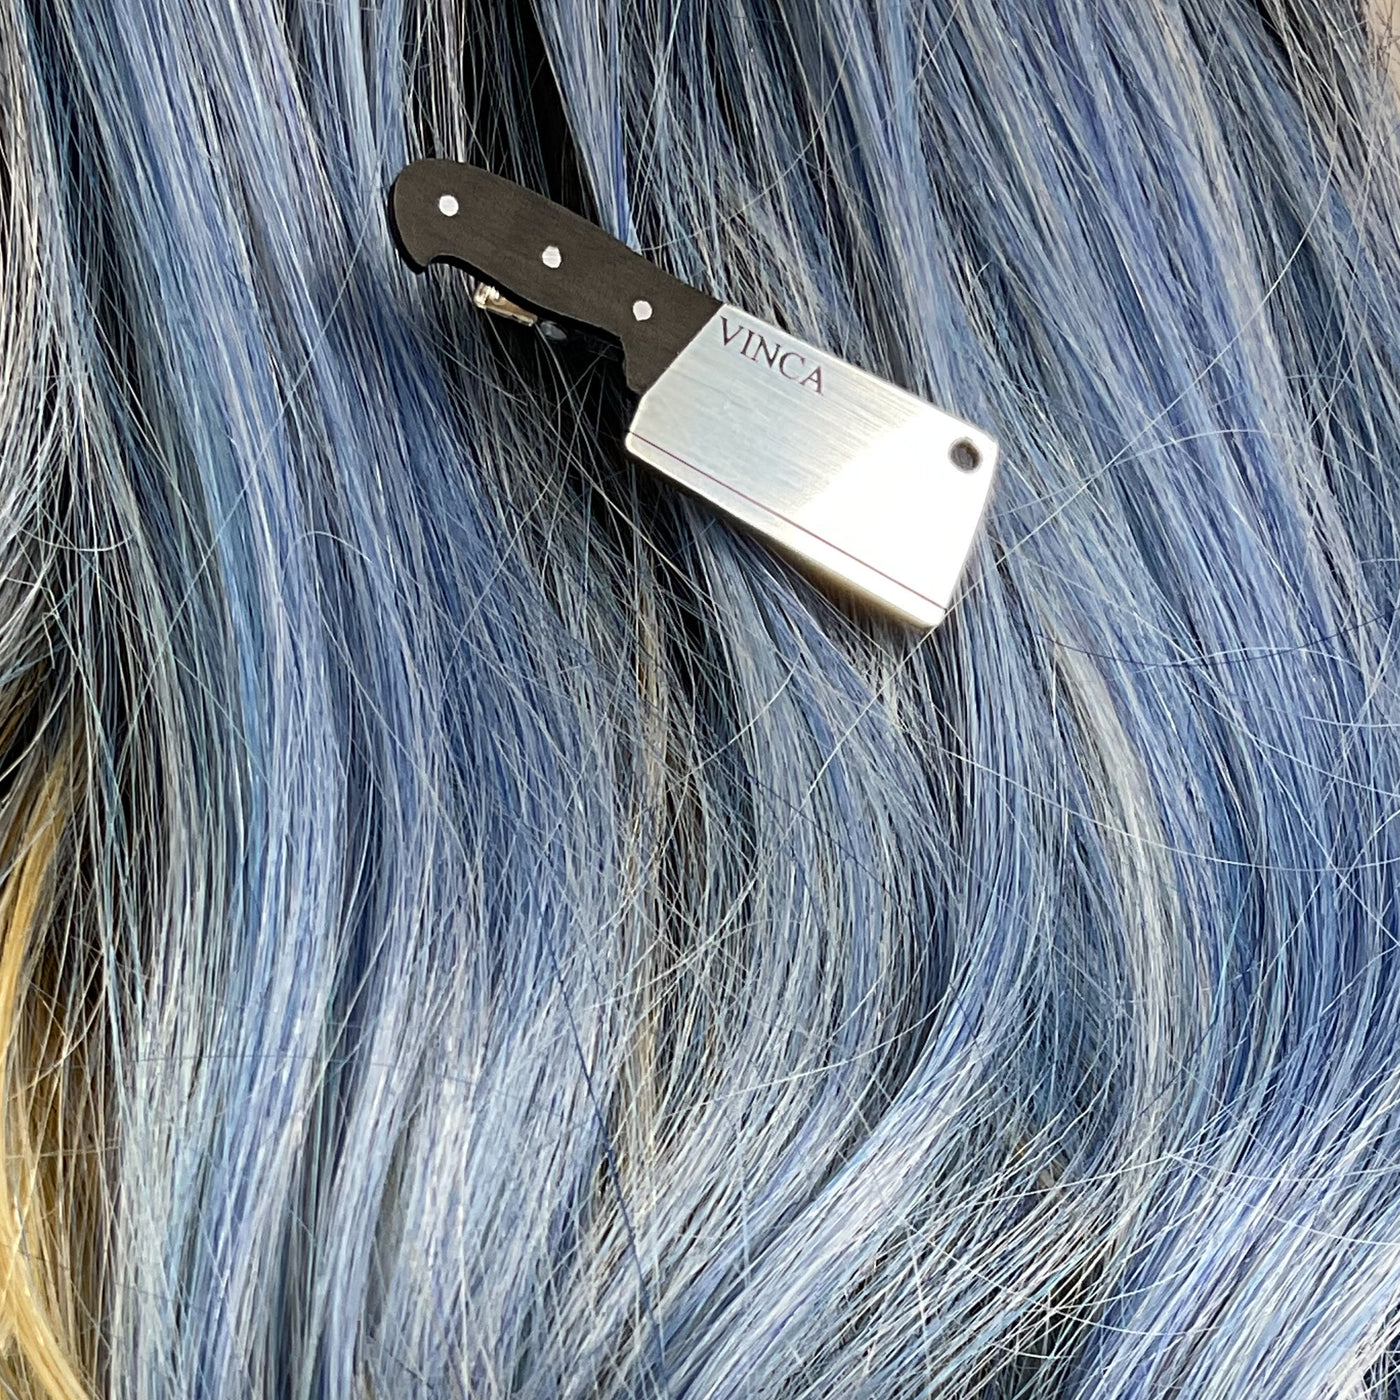 Cleave Me Alone - little cleaver alligator style clips